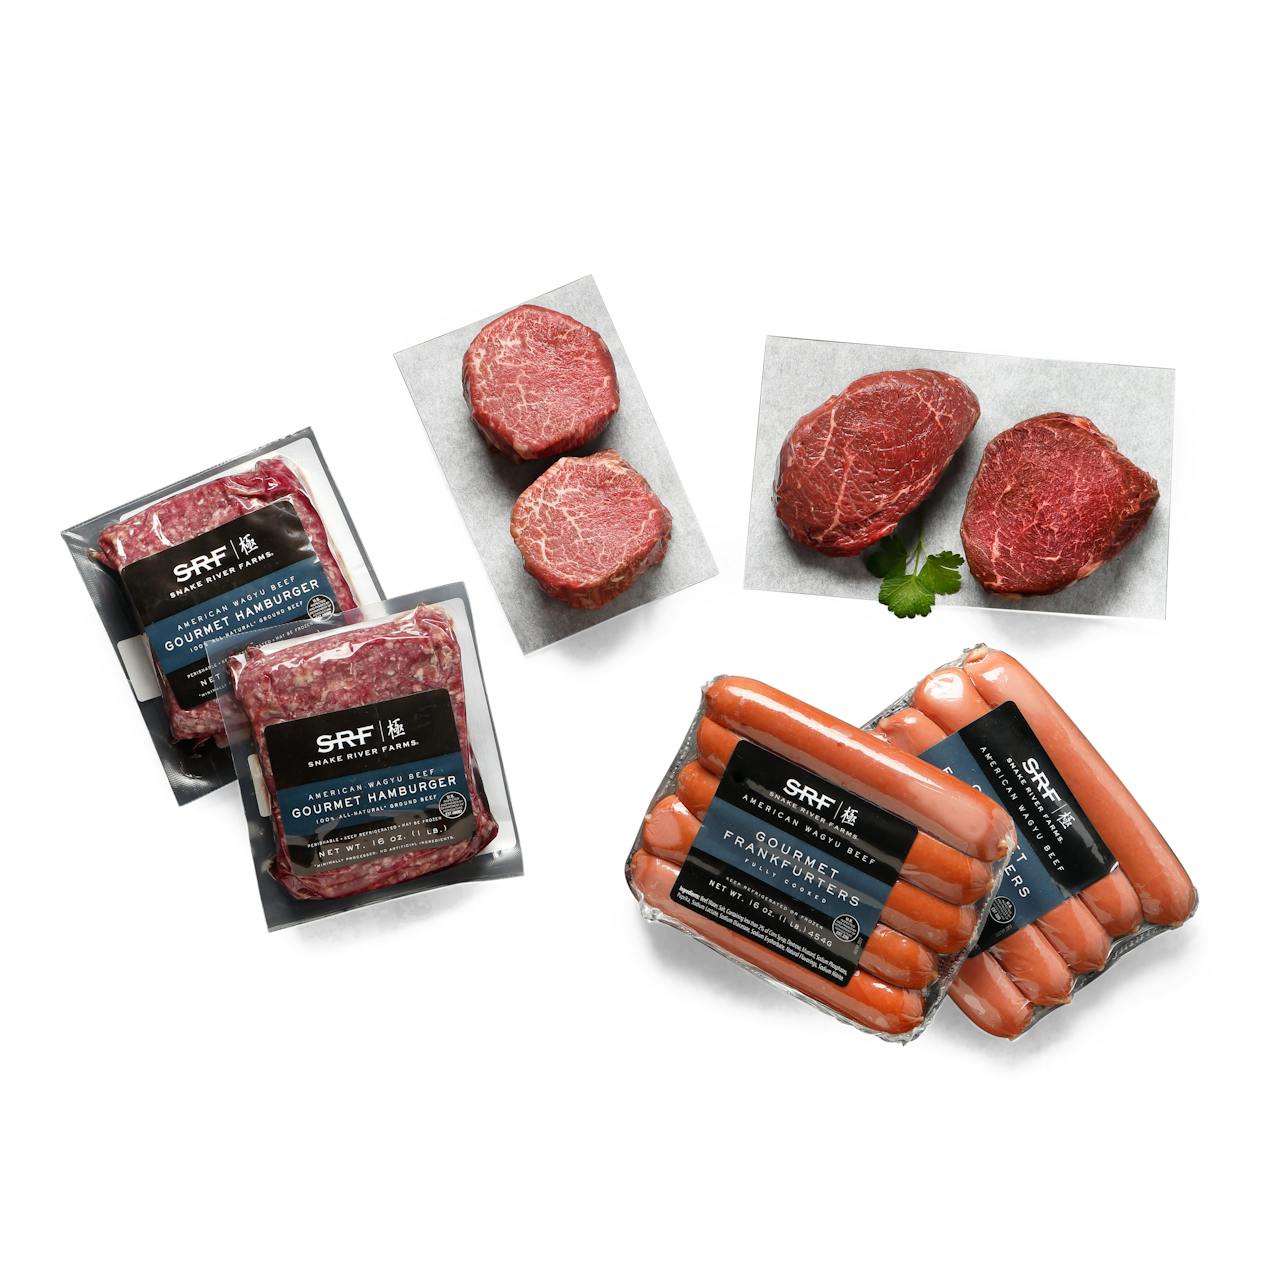 Snake River Farms American Wagyu Grilling Pack